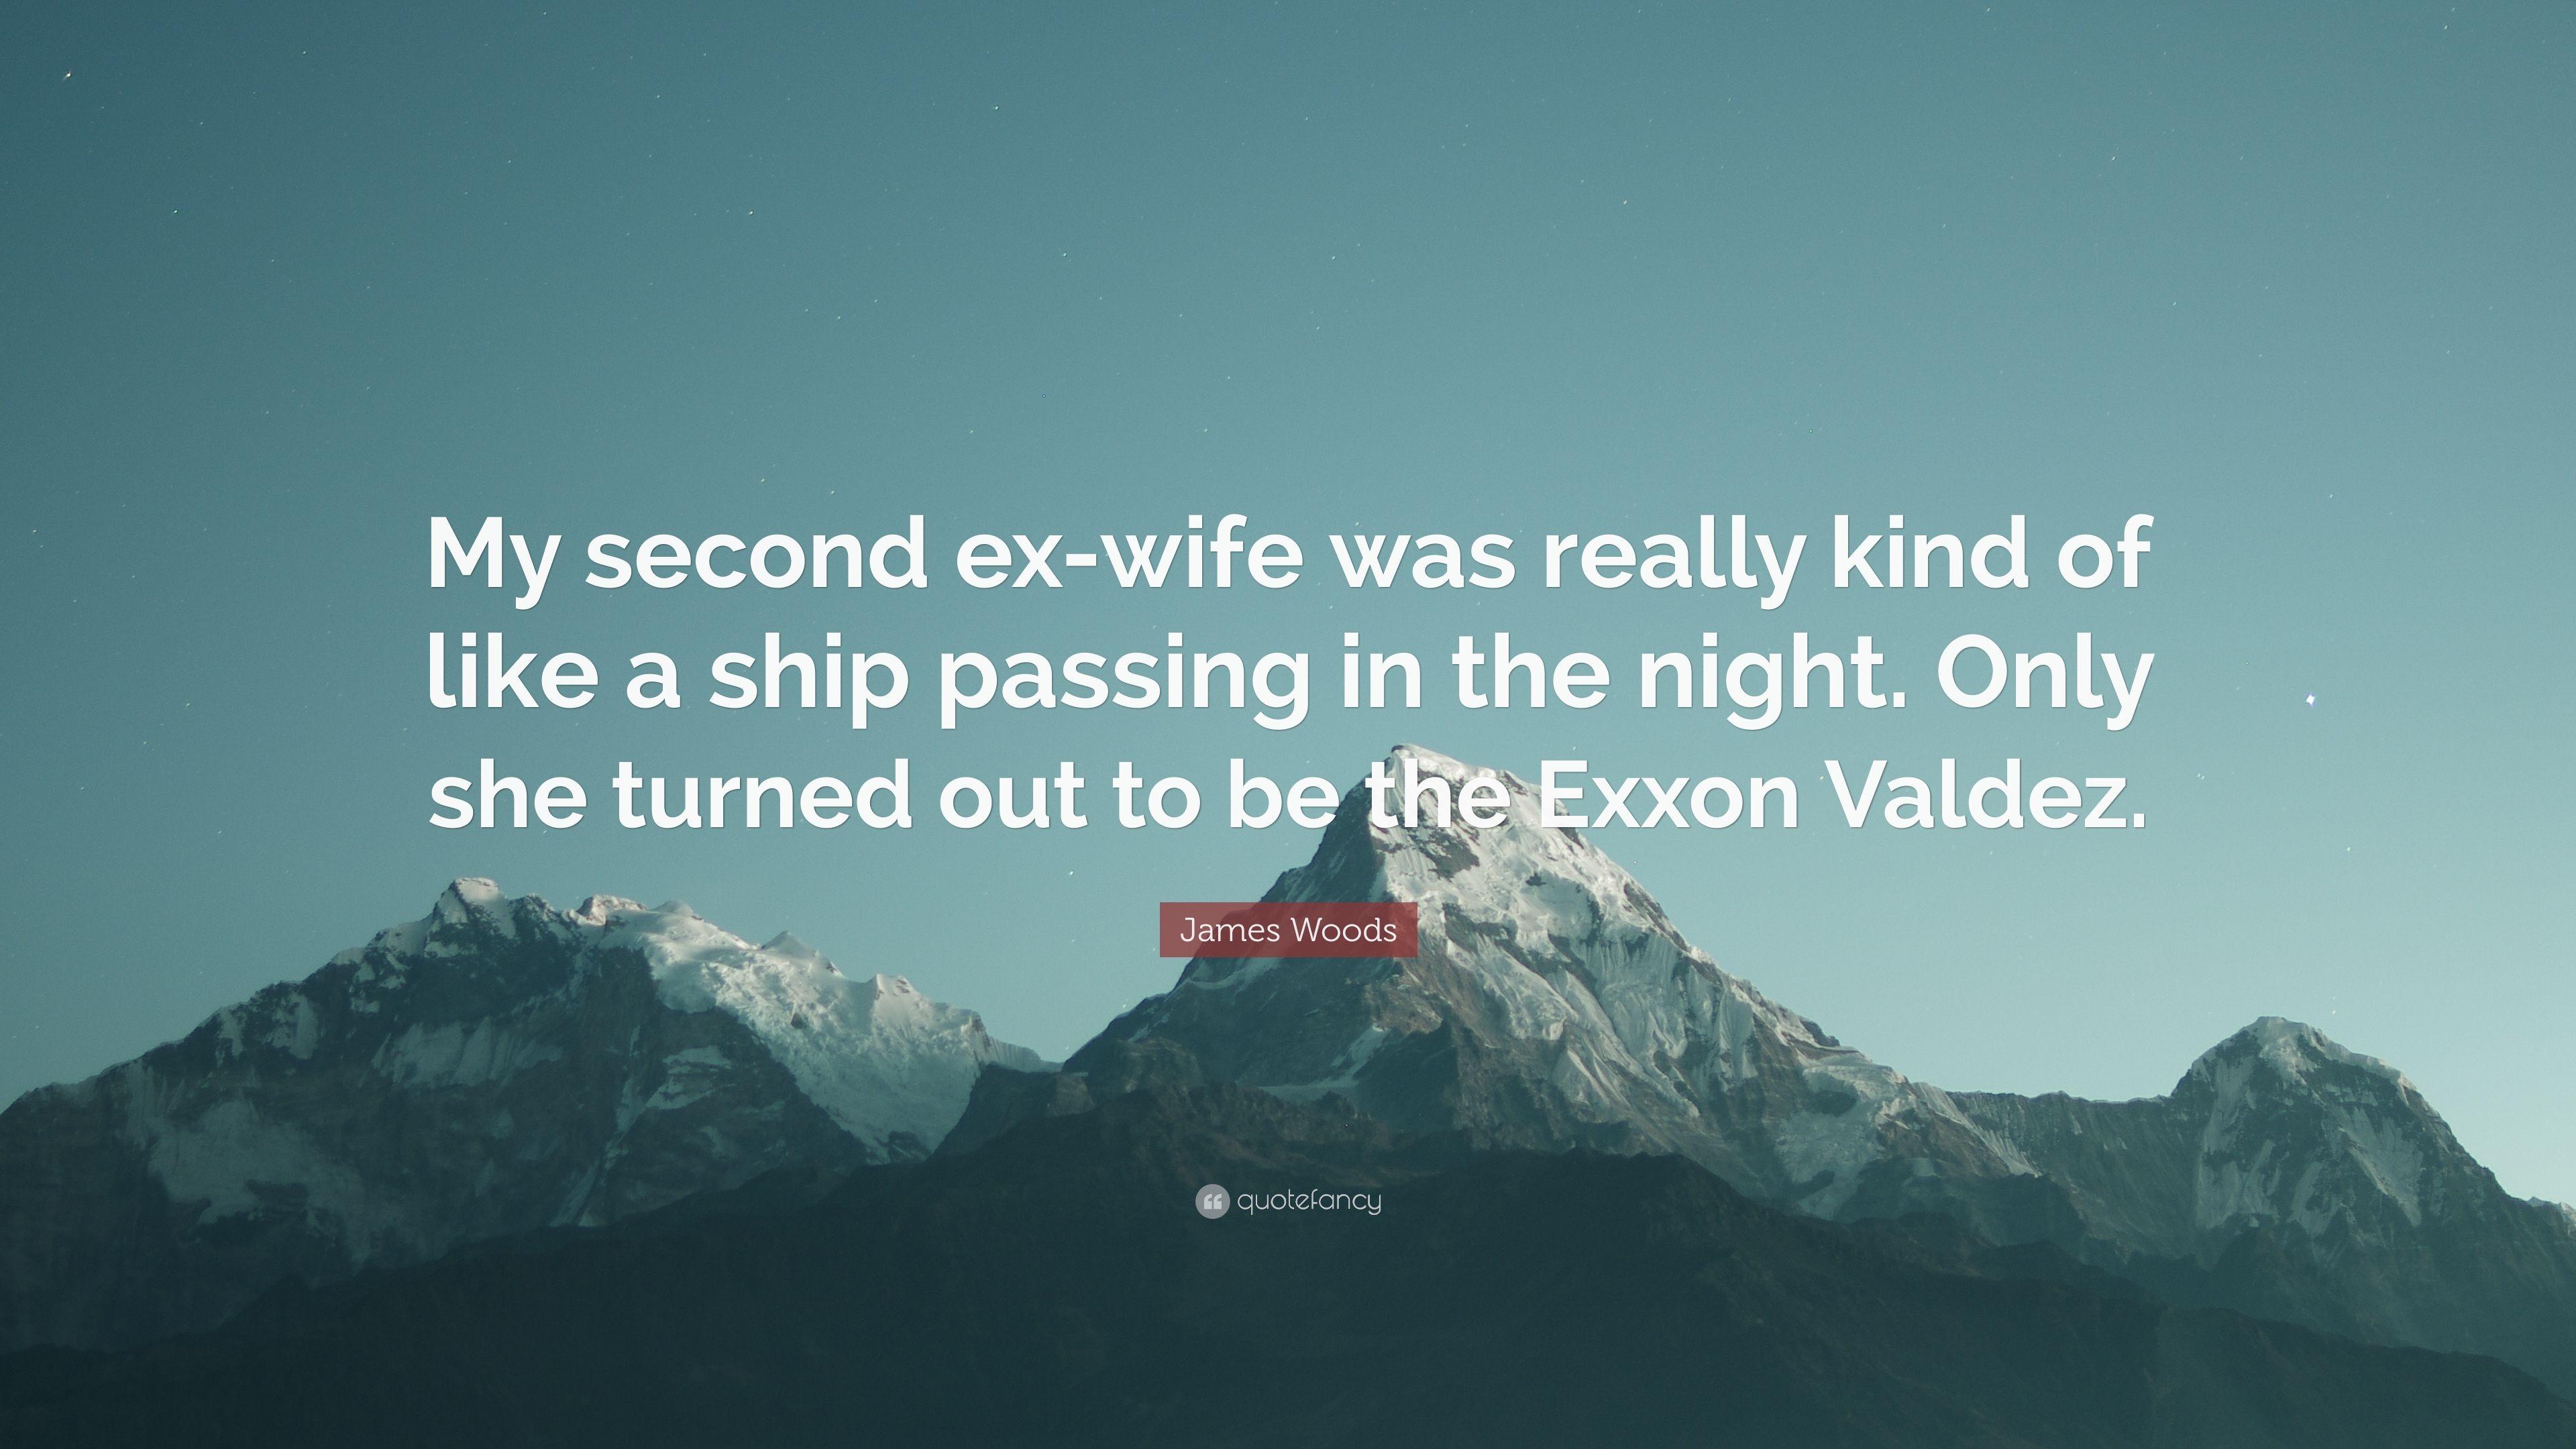 James Woods Quote: “My Second Ex Wife Was Really Kind Of Like A